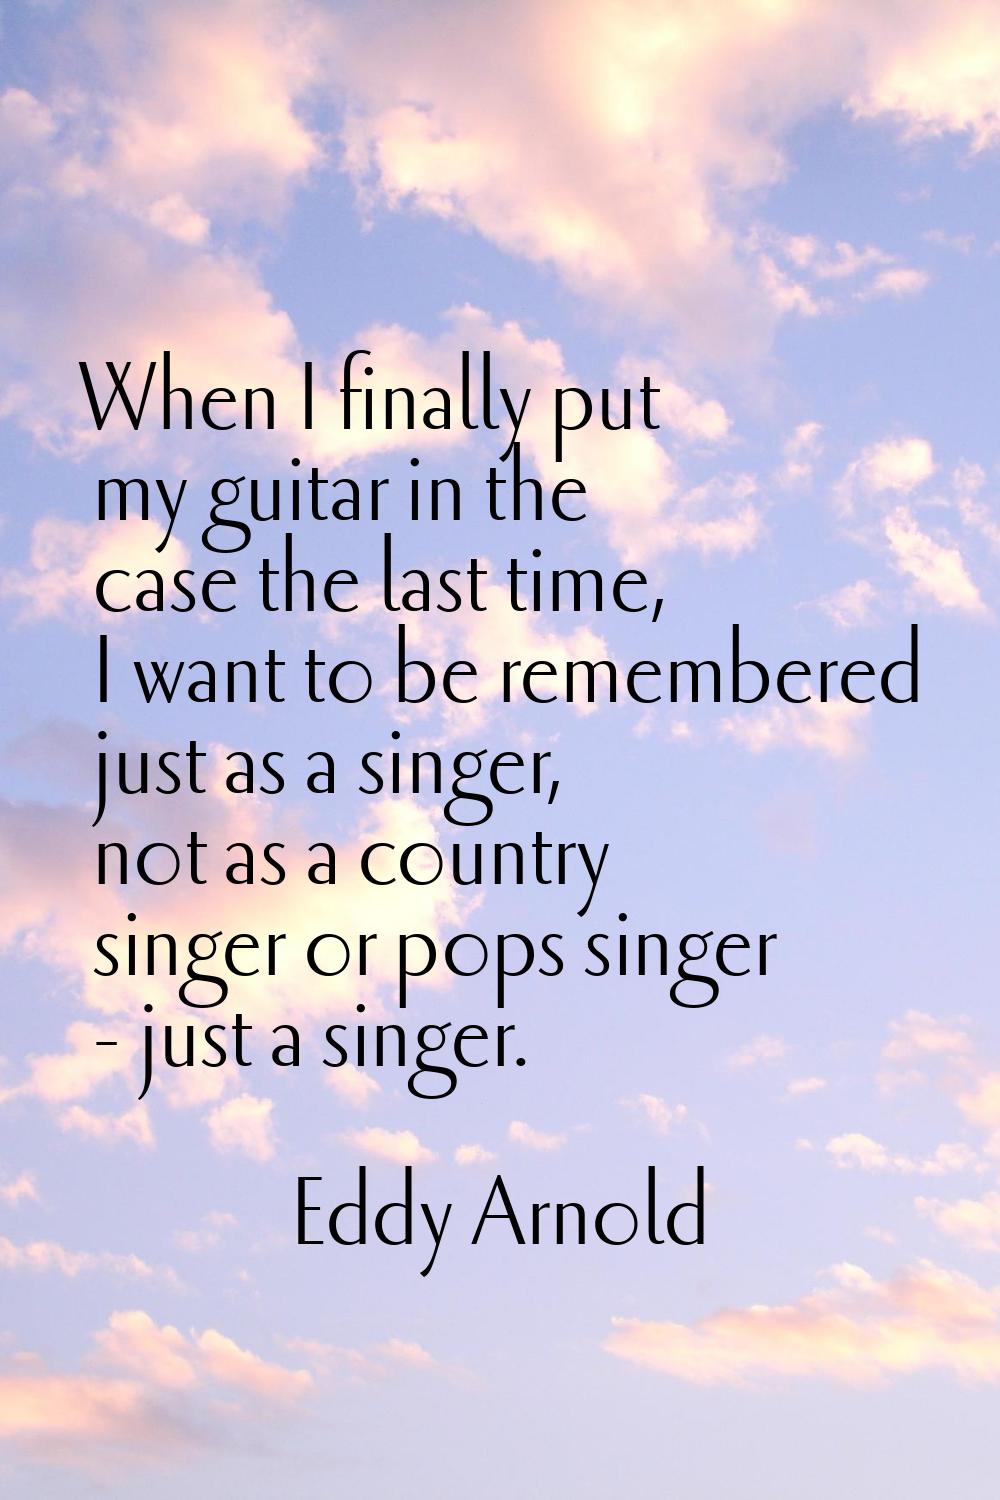 When I finally put my guitar in the case the last time, I want to be remembered just as a singer, n